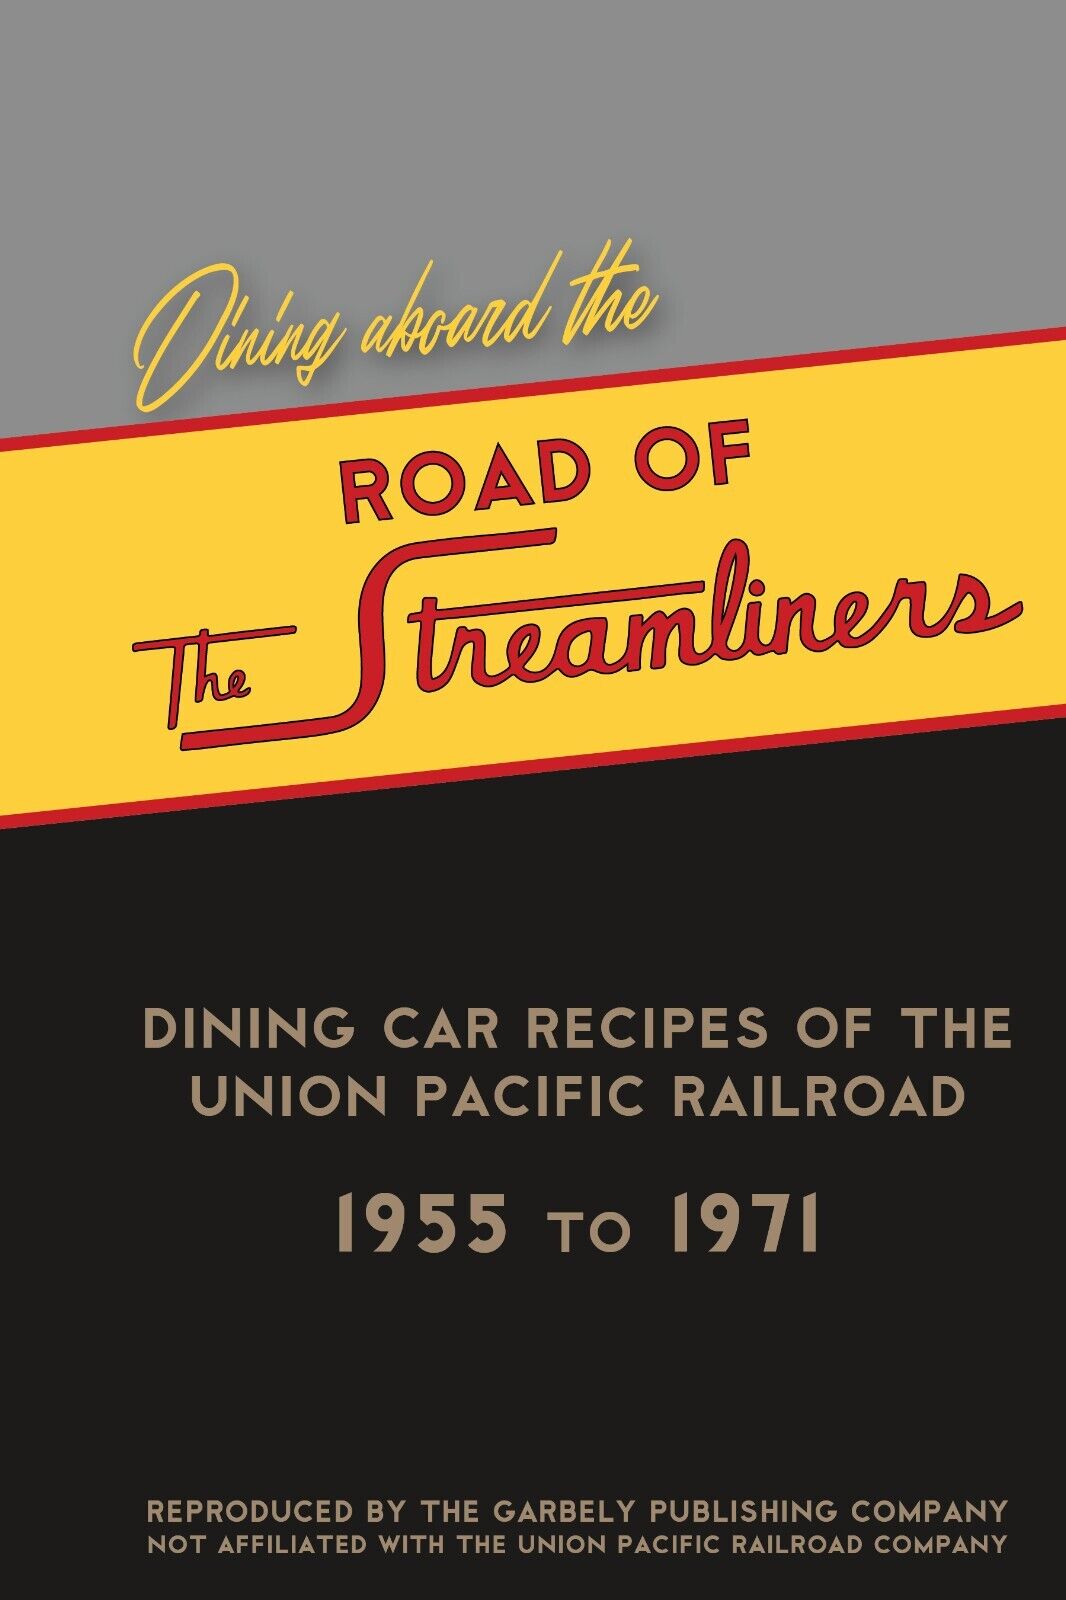 Dining aboard the Road of the Streamliners: Union Pacific Railroad Recipes, 1955